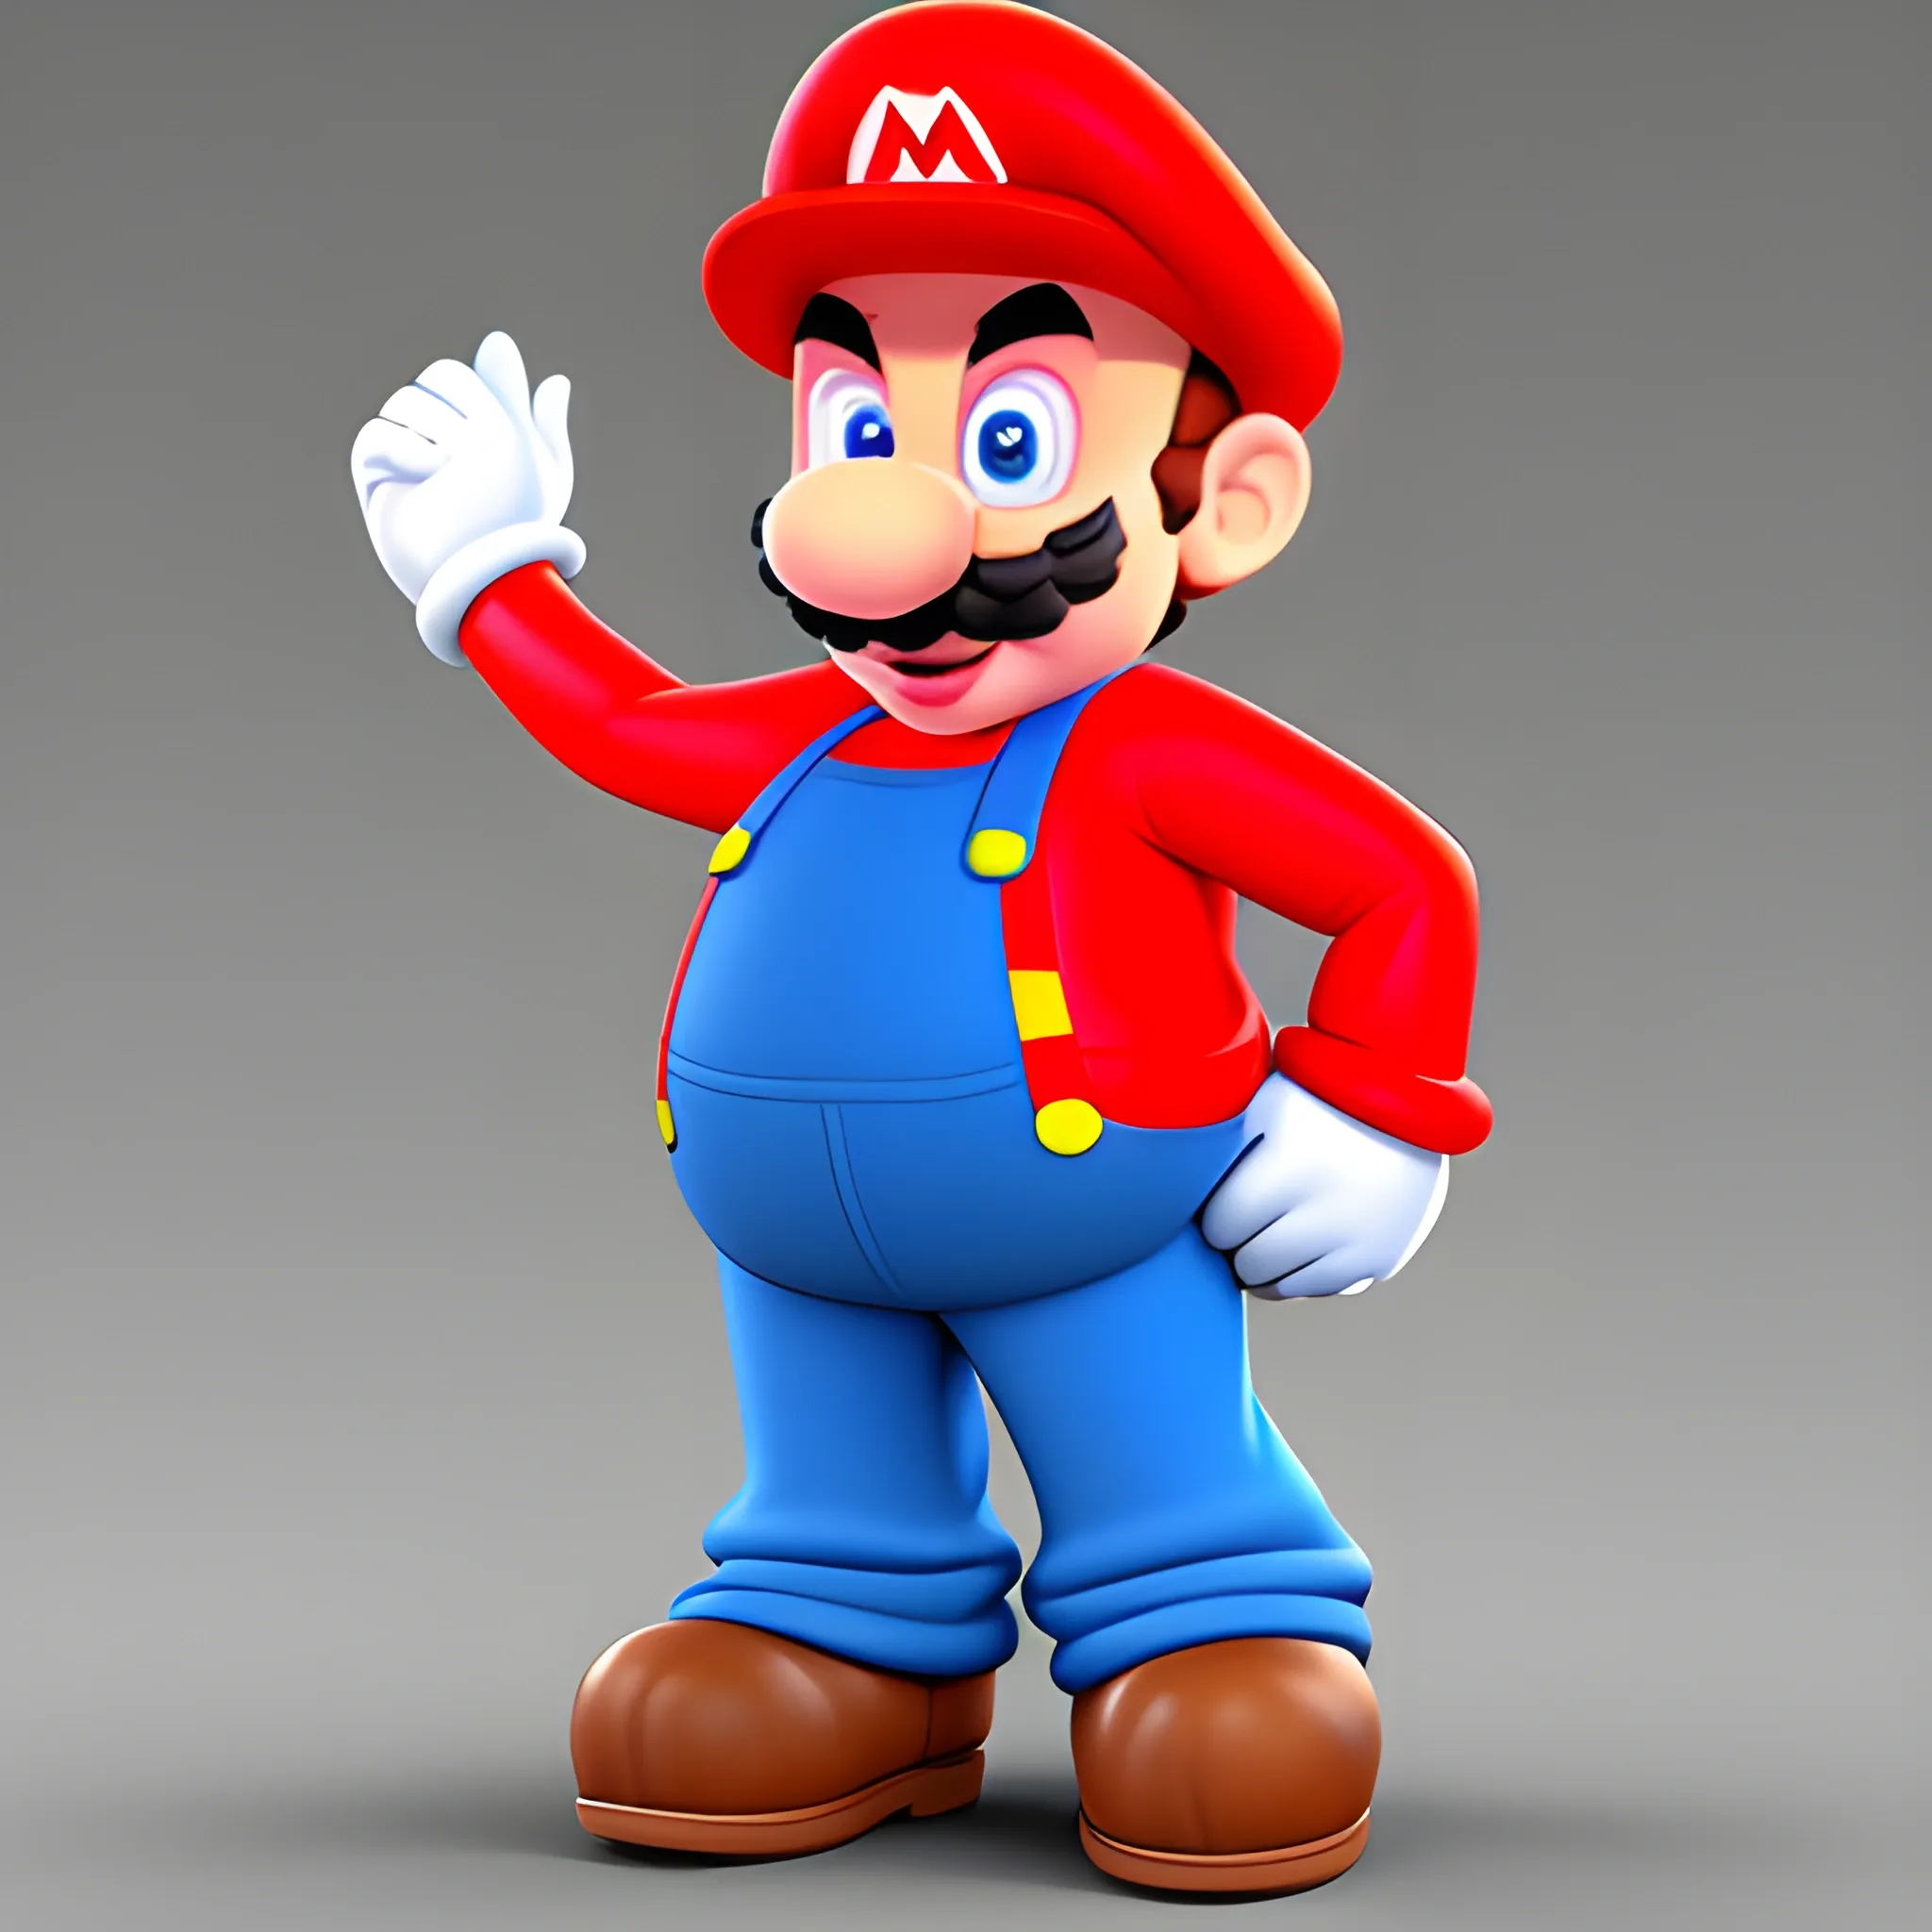 Funny and fashionable uncle Mario, Cartoon, 3D